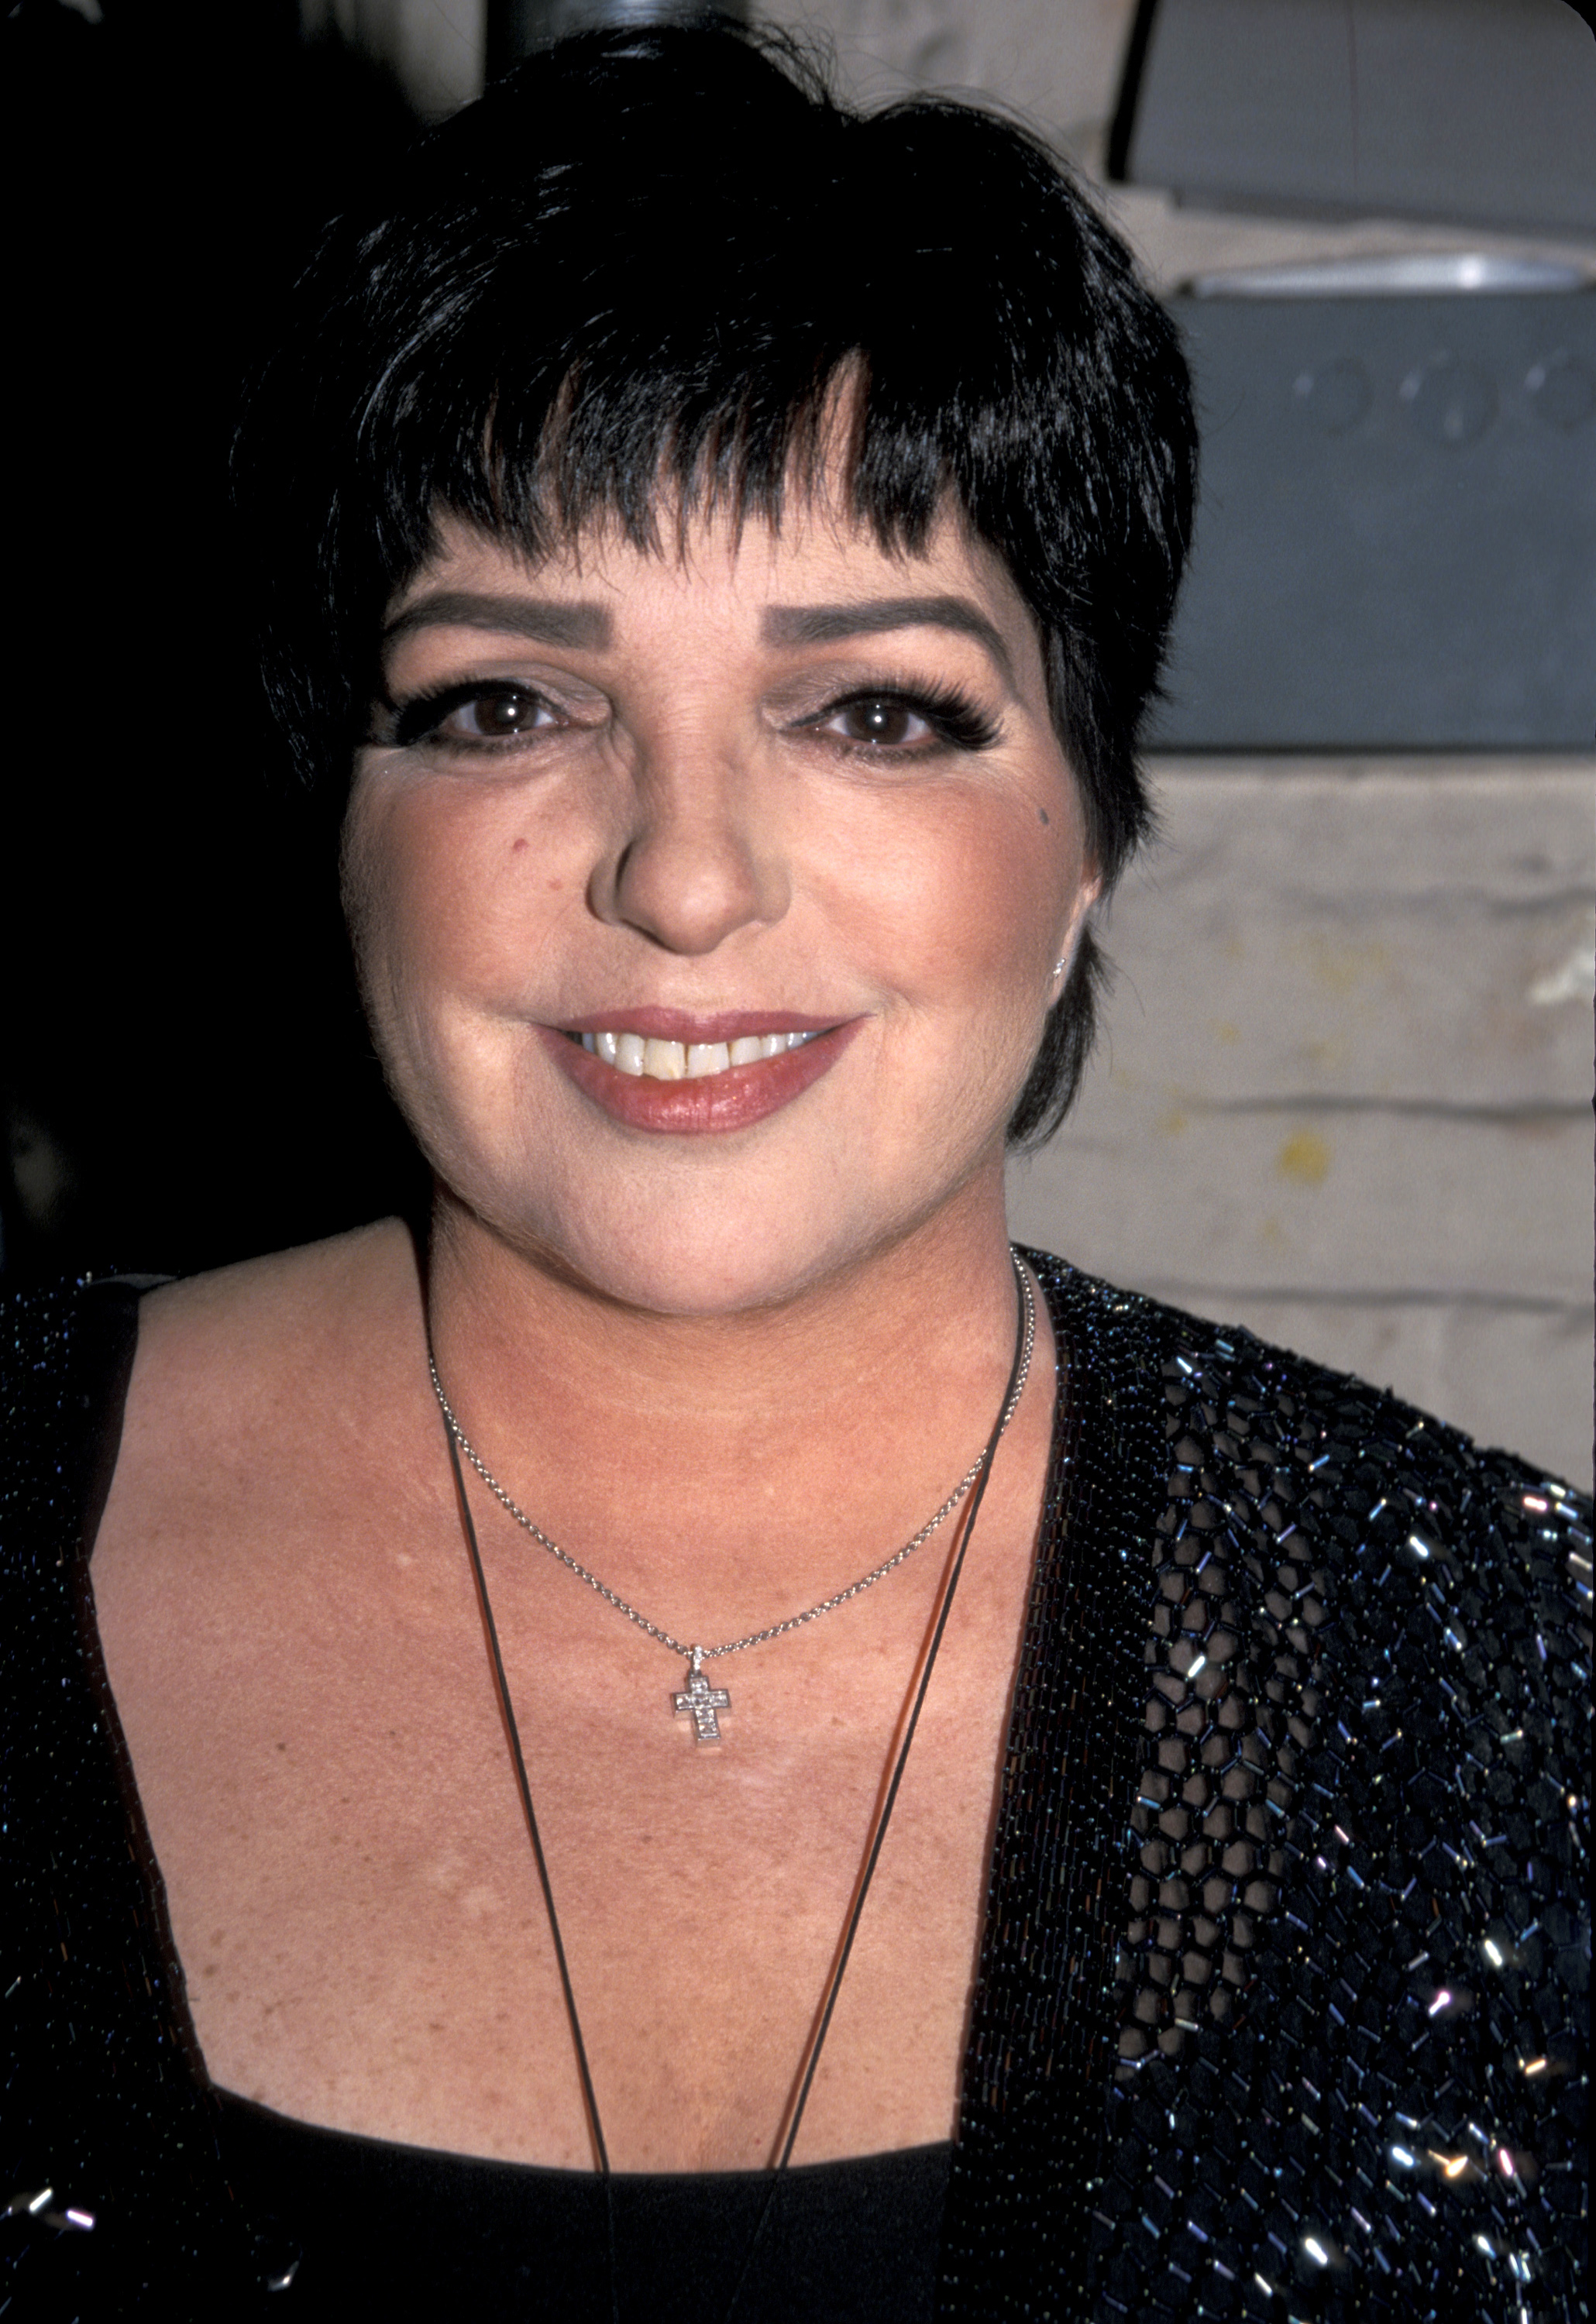 Liza Minnelli attends the 14th Annual MAC Awards at Town Hall in New York City, New York. | Source: Getty Images